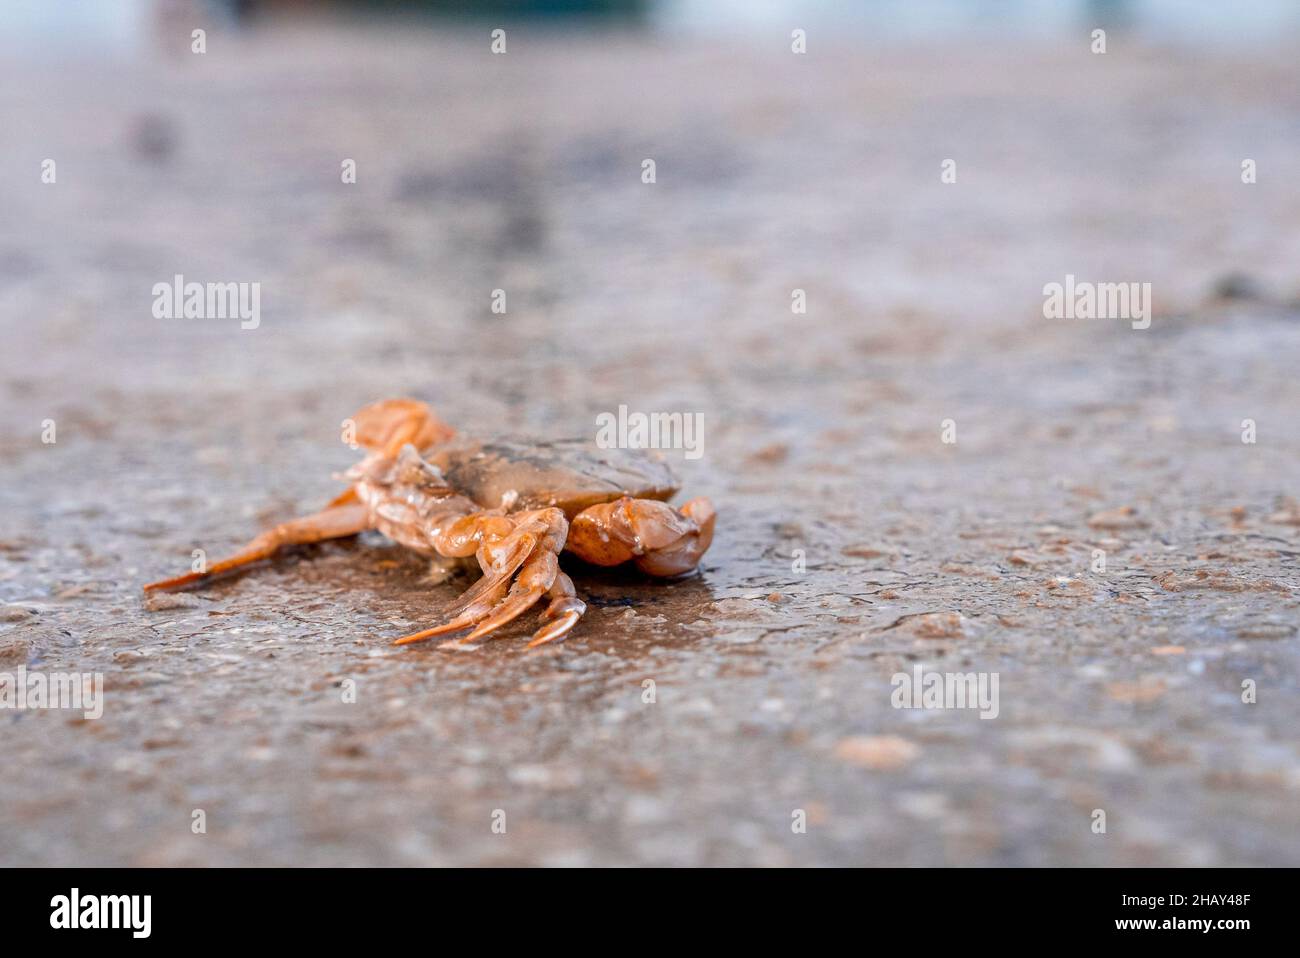 Closeup of dead crab on wet concrete land at harbour Stock Photo